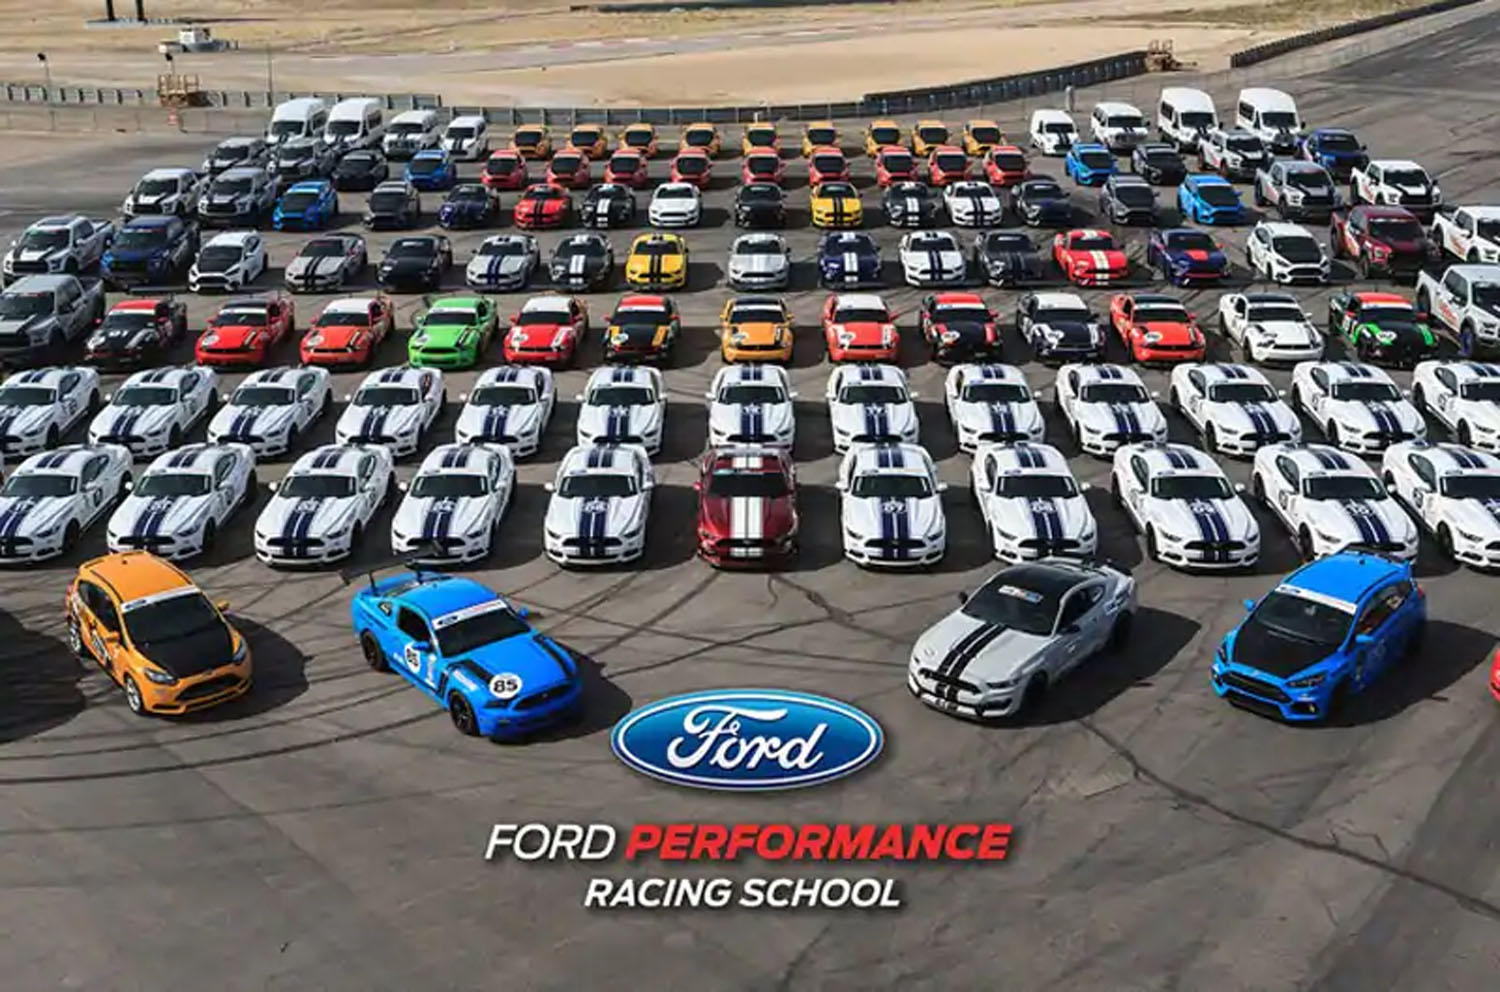 https://fordauthority.com/wp-content/uploads/2019/07/Ford-Performance-Racing-School-001.jpg